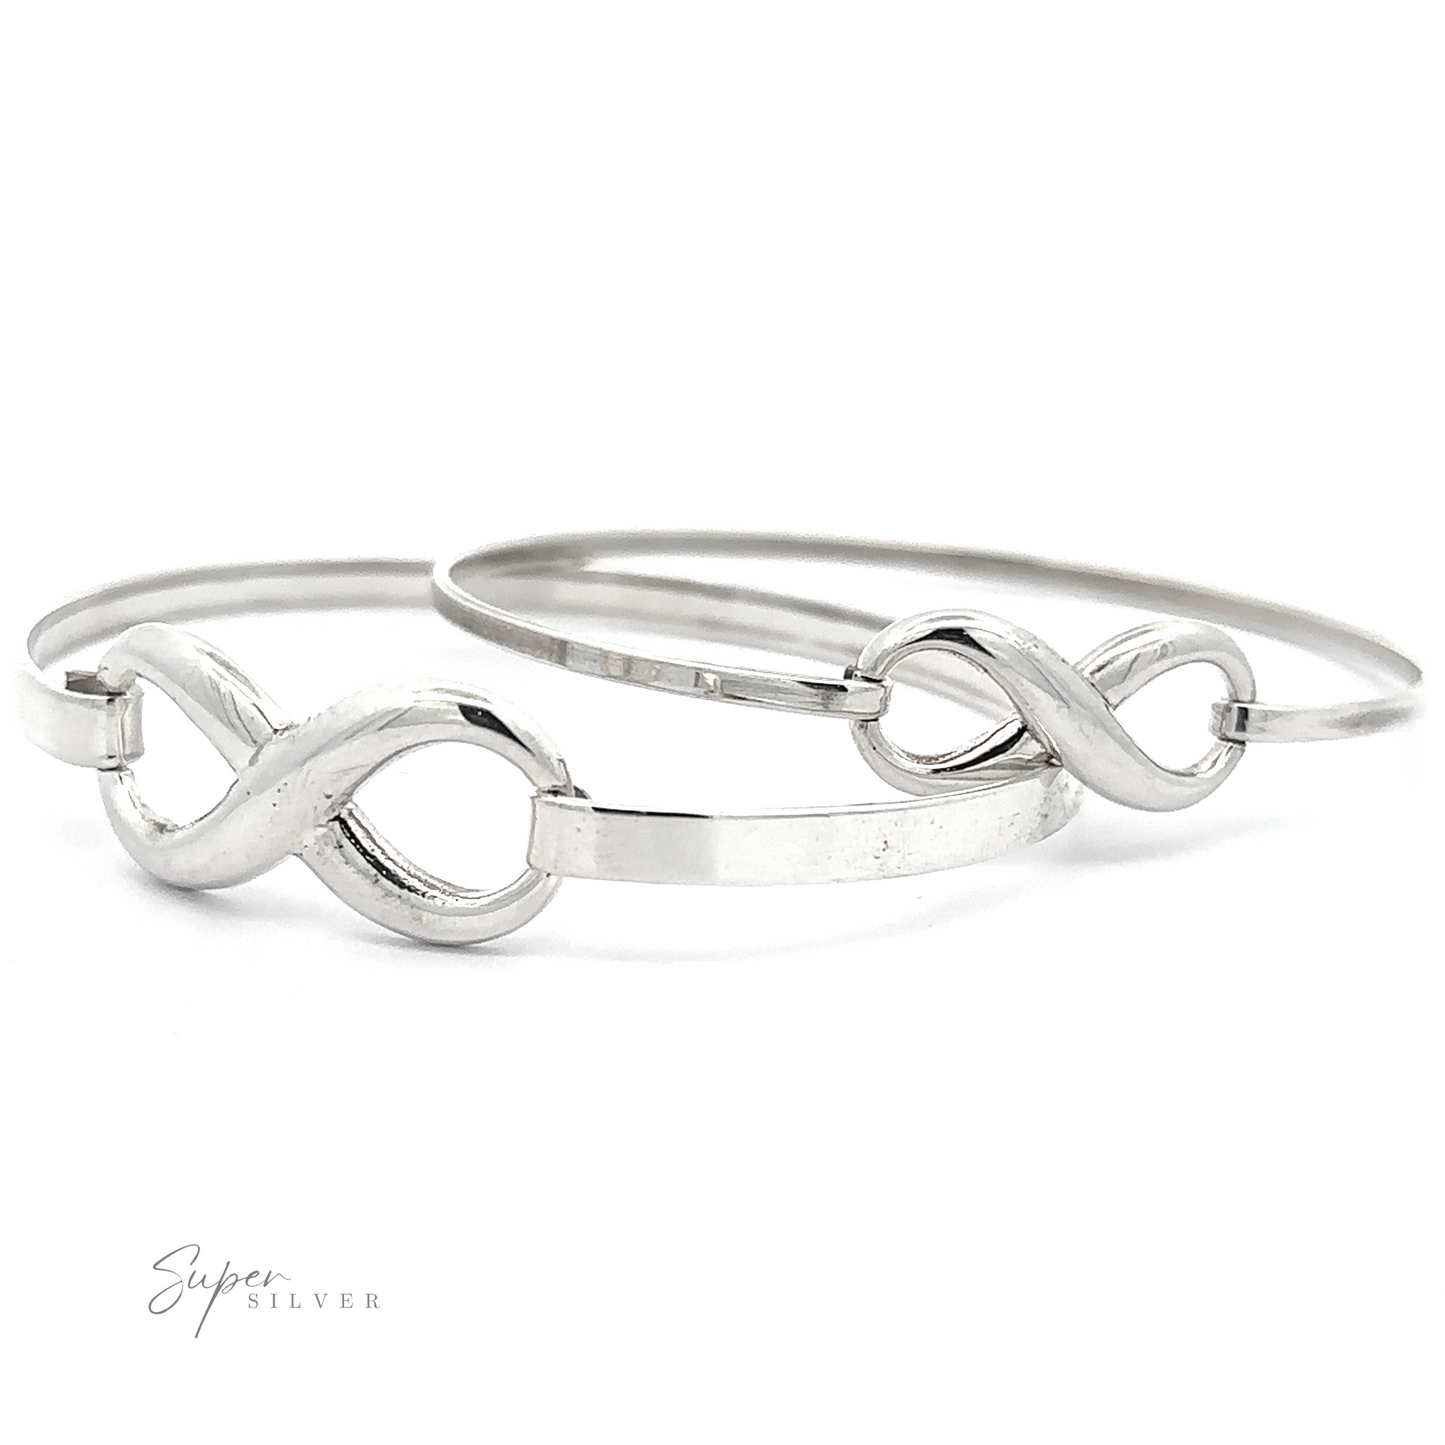 
                  
                    Two Infinity Bracelets with elegant latch clasps are positioned side by side on a white background. The logo "Super Silver" is visible in the bottom left corner.
                  
                